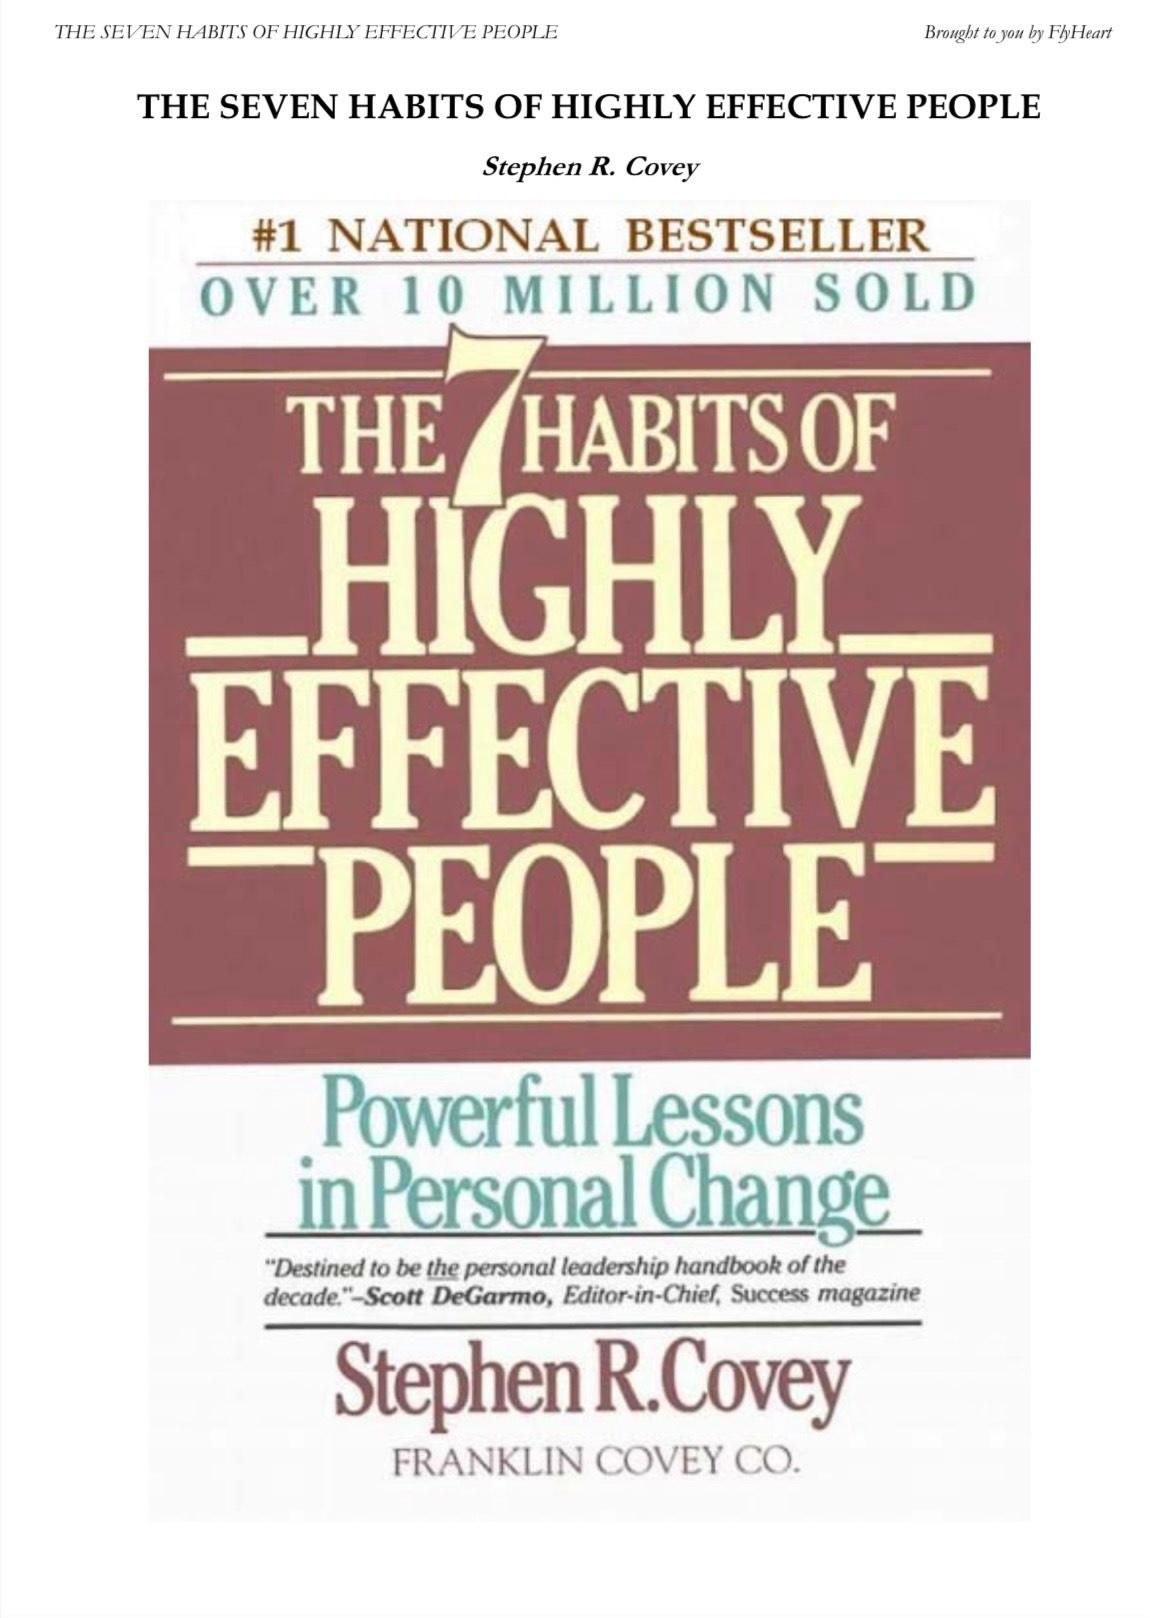 img-The 7 Habits of Highly Effective People - Stephen R.Covey 

